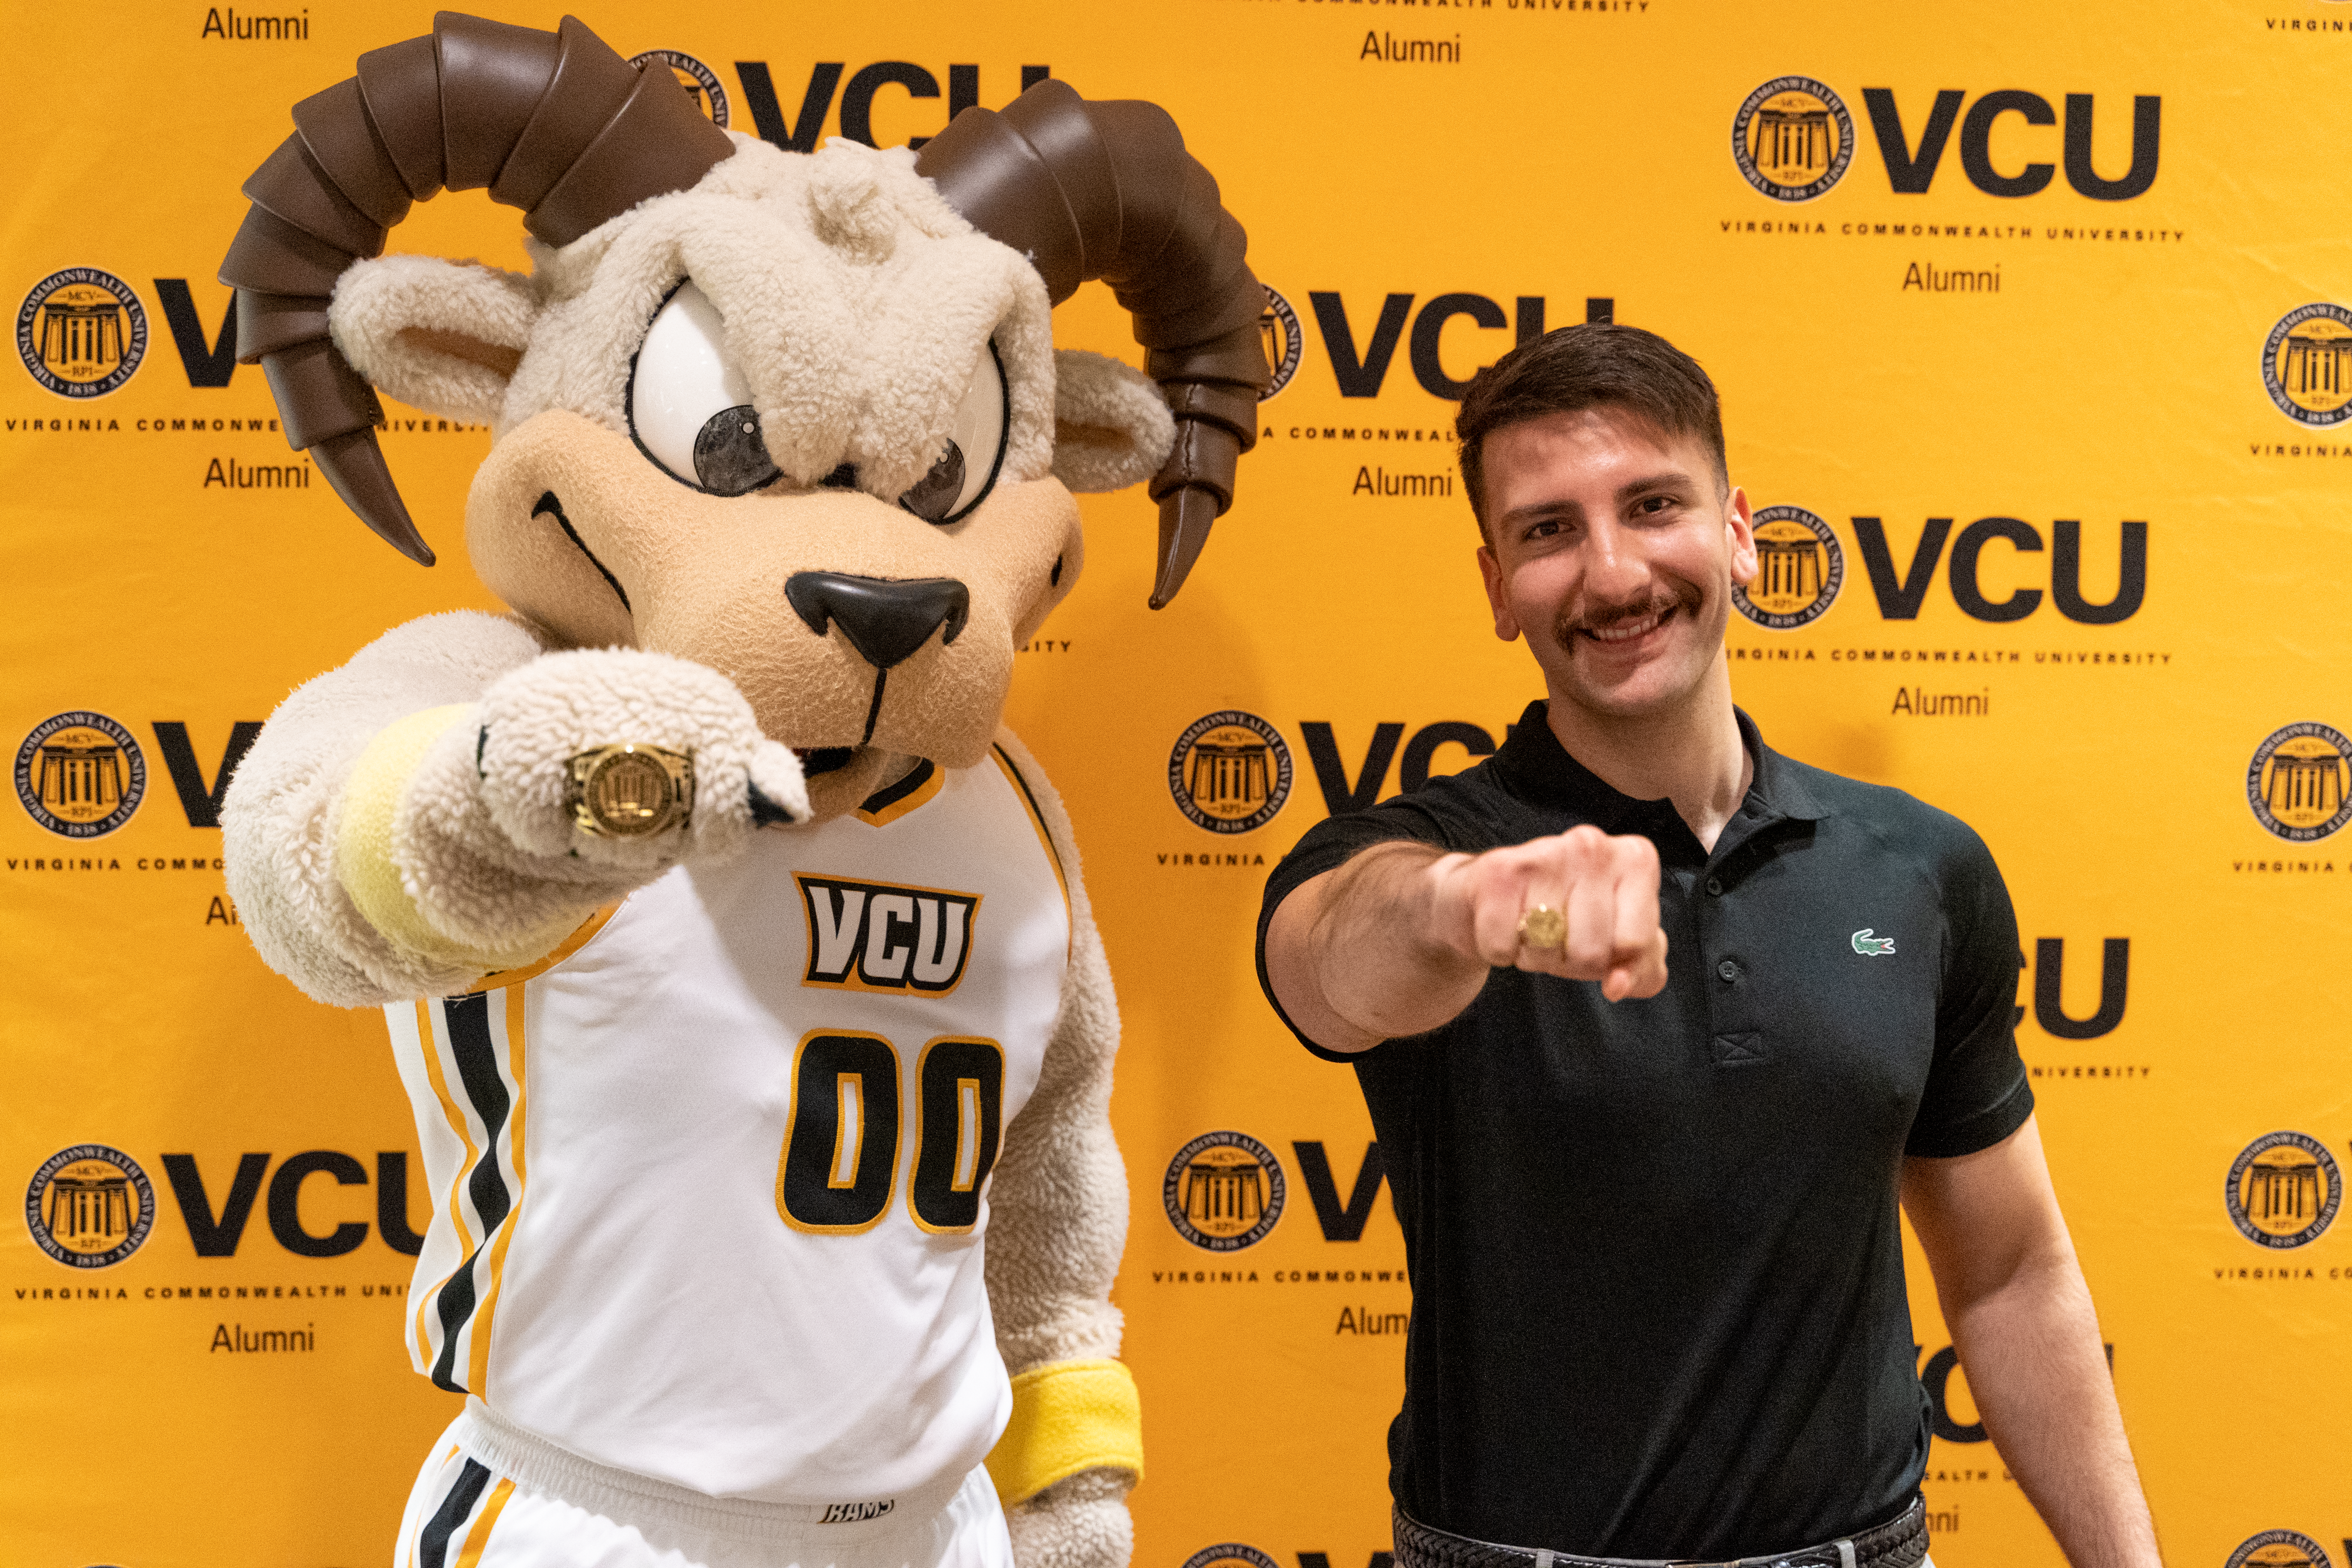 Rodney The Ram and a student showing off their VCU class rings in front of a gold backdrop